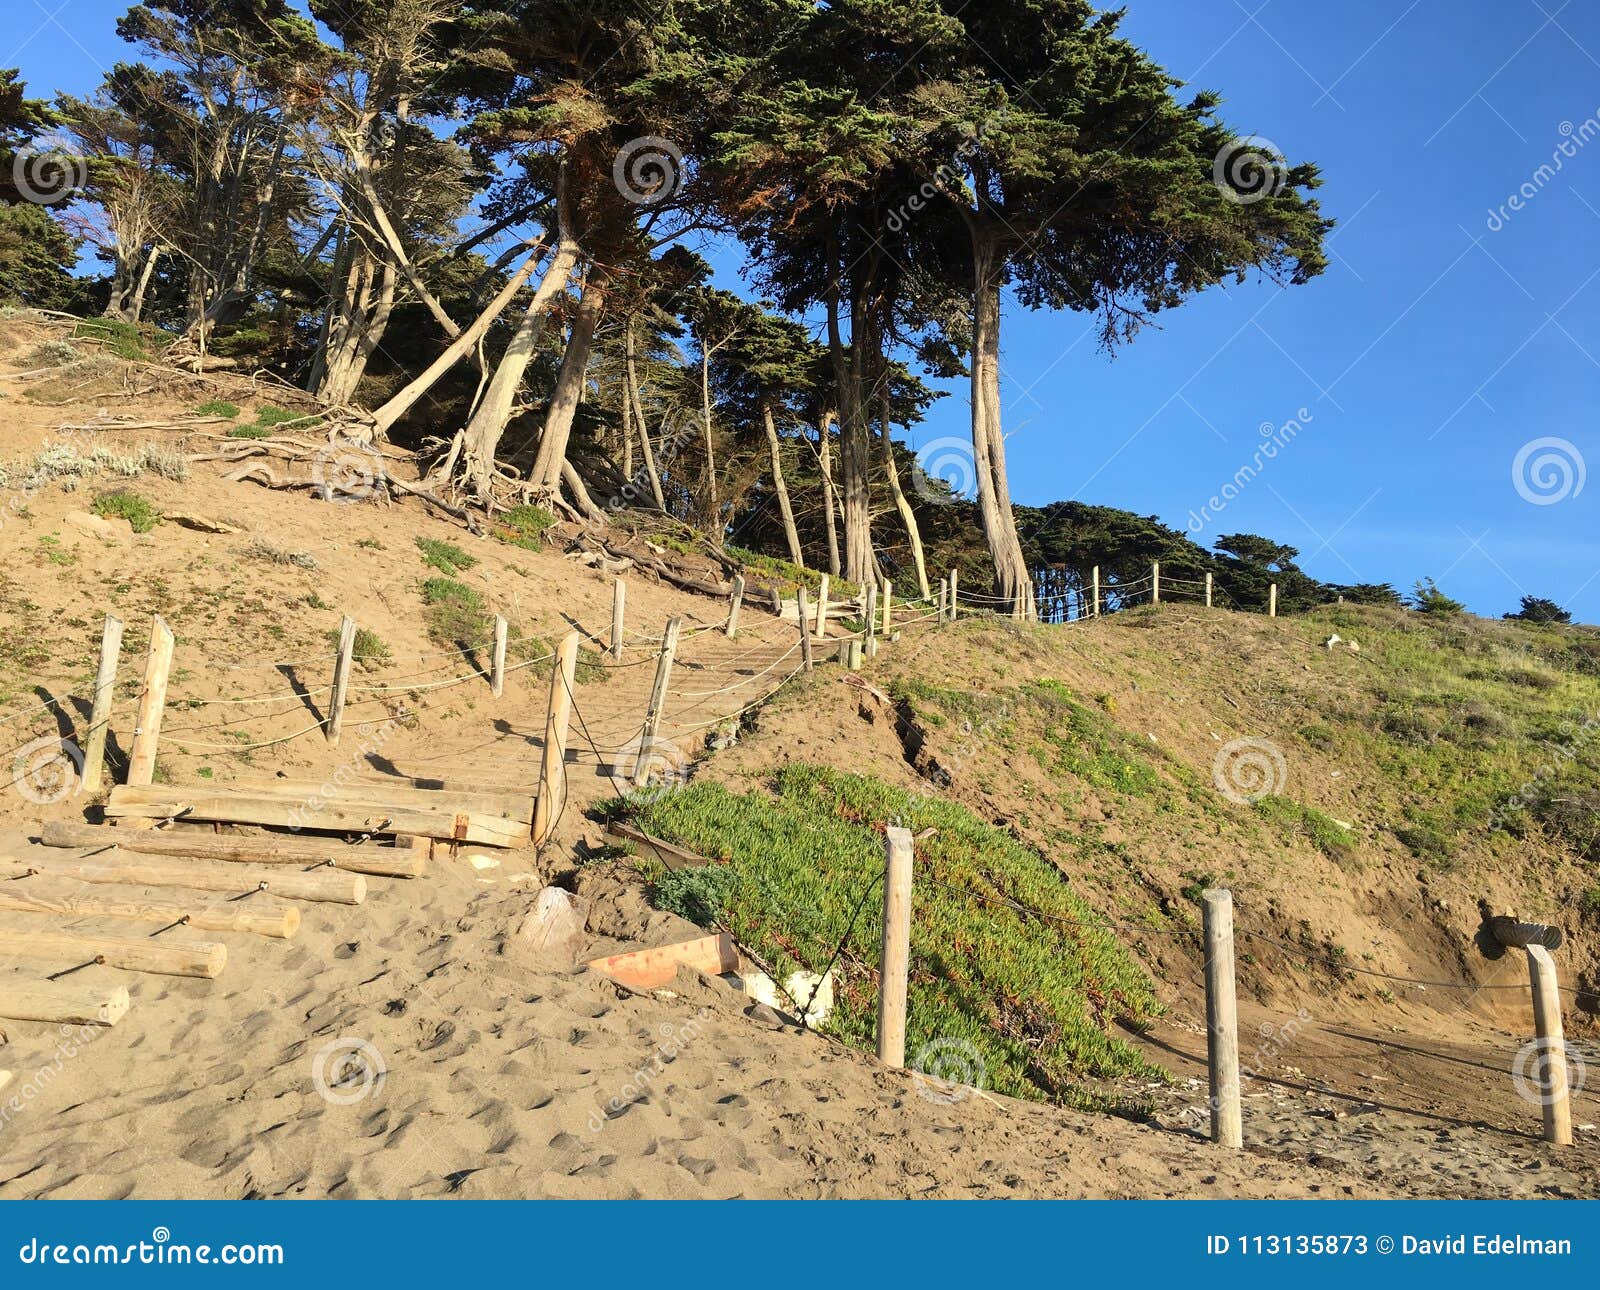 The Sand Ladder at Baker Beach, 8. A part of the Pacific Coast Trail, it is a very inconspicuous set of railroad ties set into the sandy embankment. It is so inconspicuous that you can be standing right on it and not even realize it. The ones who can never miss this are those in the `Escape from Alcatraz Triathlon,` as this is one of the most intense parts of the whole race.